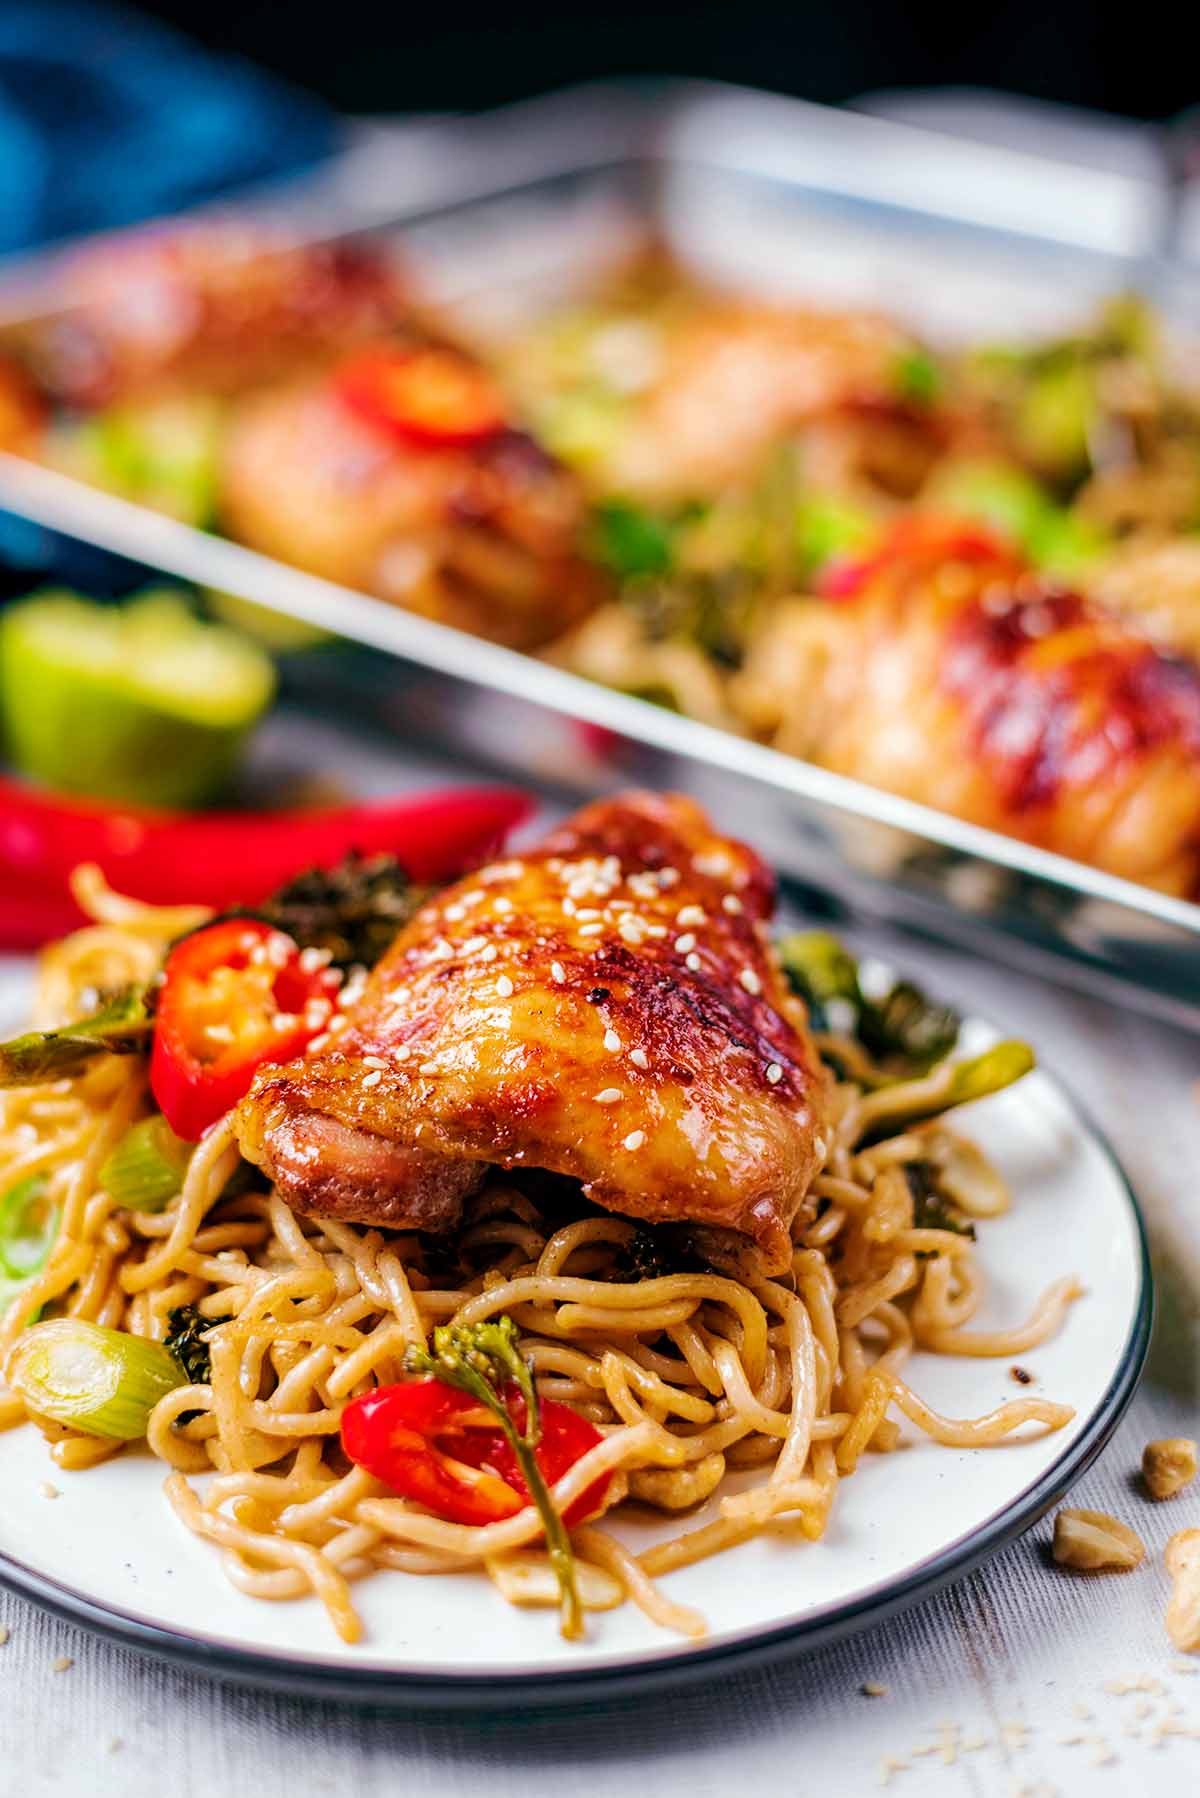 A plate of chicken and noodles in front of a tray of more chicken.